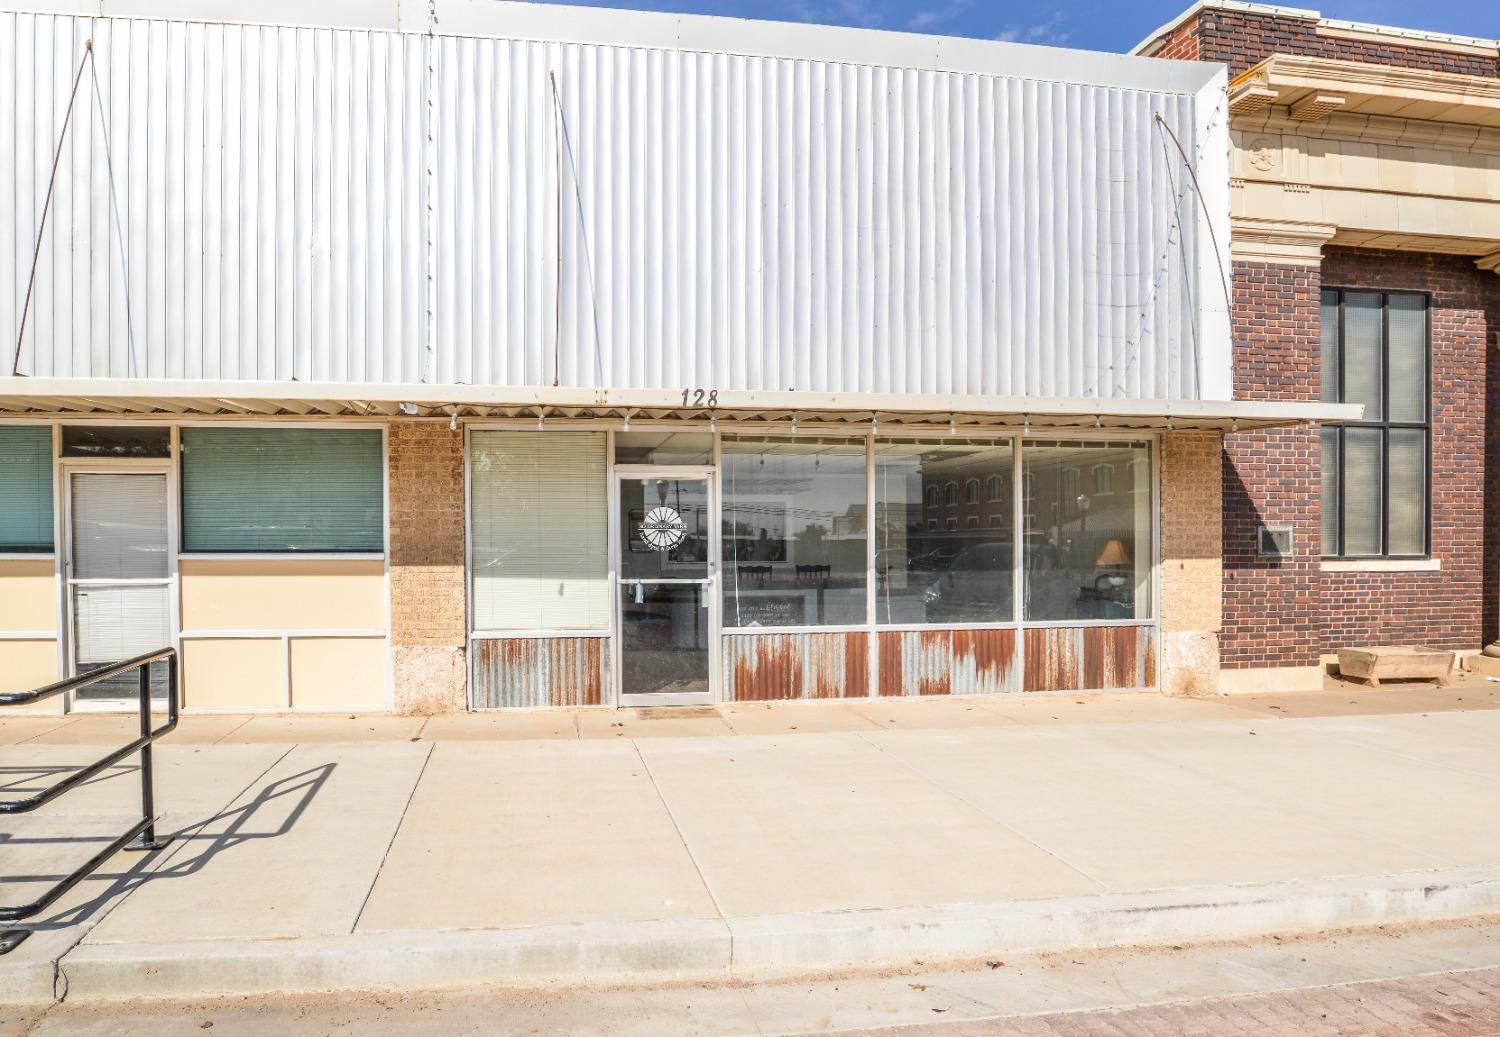 Let your creative mind go to work on this wonderful building located in historic downtown Post, Tx, just E. of Highway 84. Two large front retail areas with two large offices with warehouse or storage space. The warehouse/storage space has a large stainless steel sink, full bath with tub/shower combo and another half bath along with washer & dryer connections. Most recently used as part retail & part residential, offices are set up as living areas with kitchen setup in back warehouse space. A small yard just outside of back doors makes a great sitting area. This building could be used for many things from a professional office building to full retail or mixed commercial/residential.